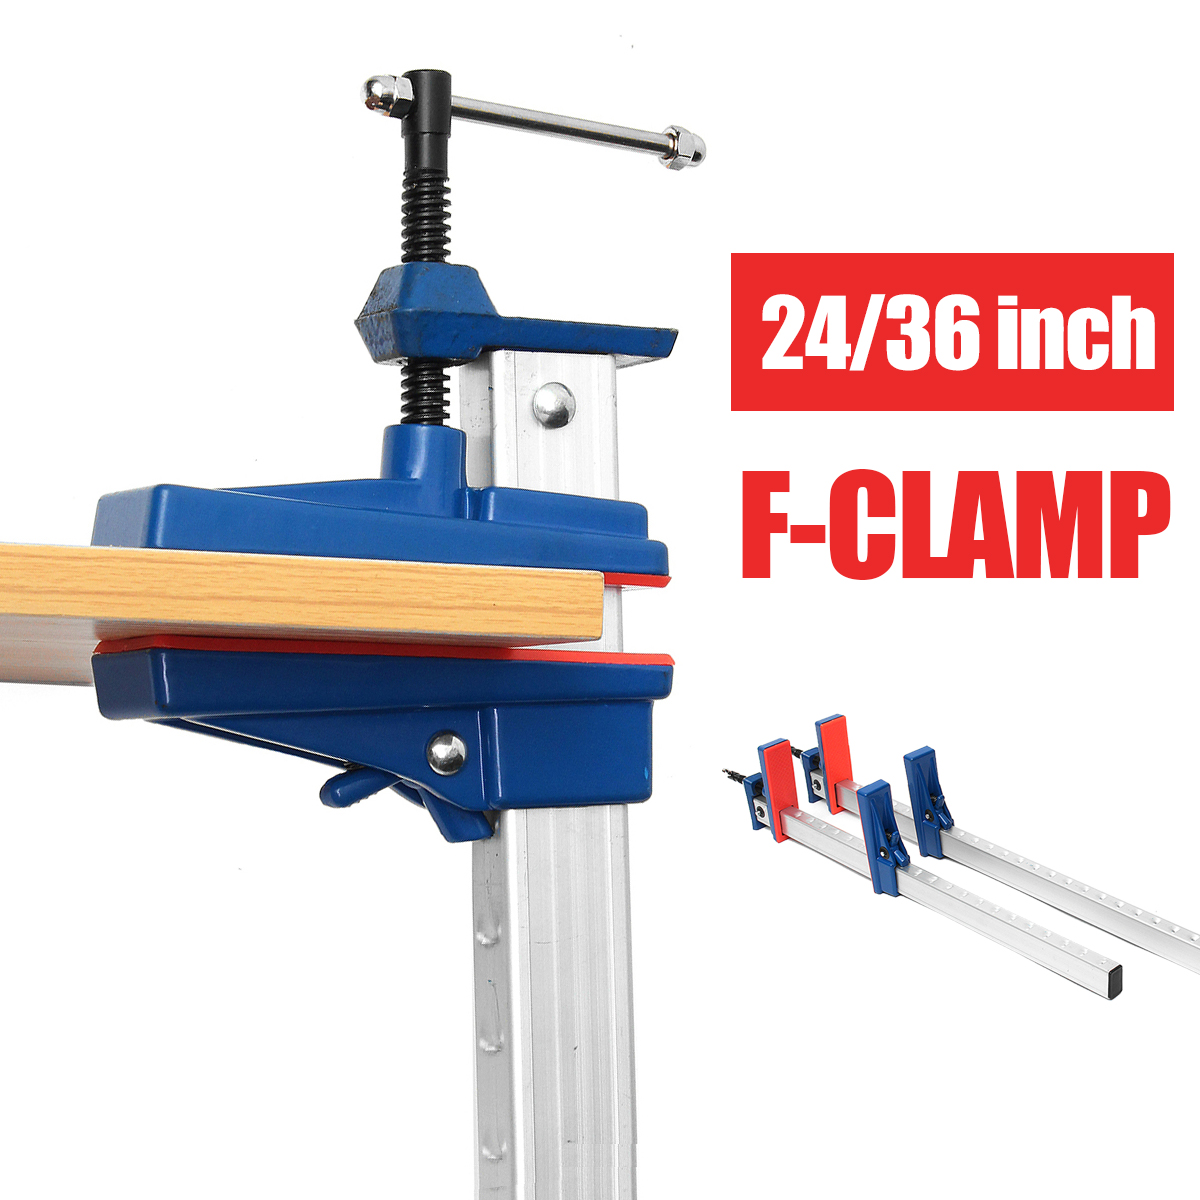 2436-Inch-Aluminum-Alloy-F-Clamp-Bar-Quick-Release-Woodworking-Clamp-Parallel-Adjustable-Heavy-Duty--1361735-2